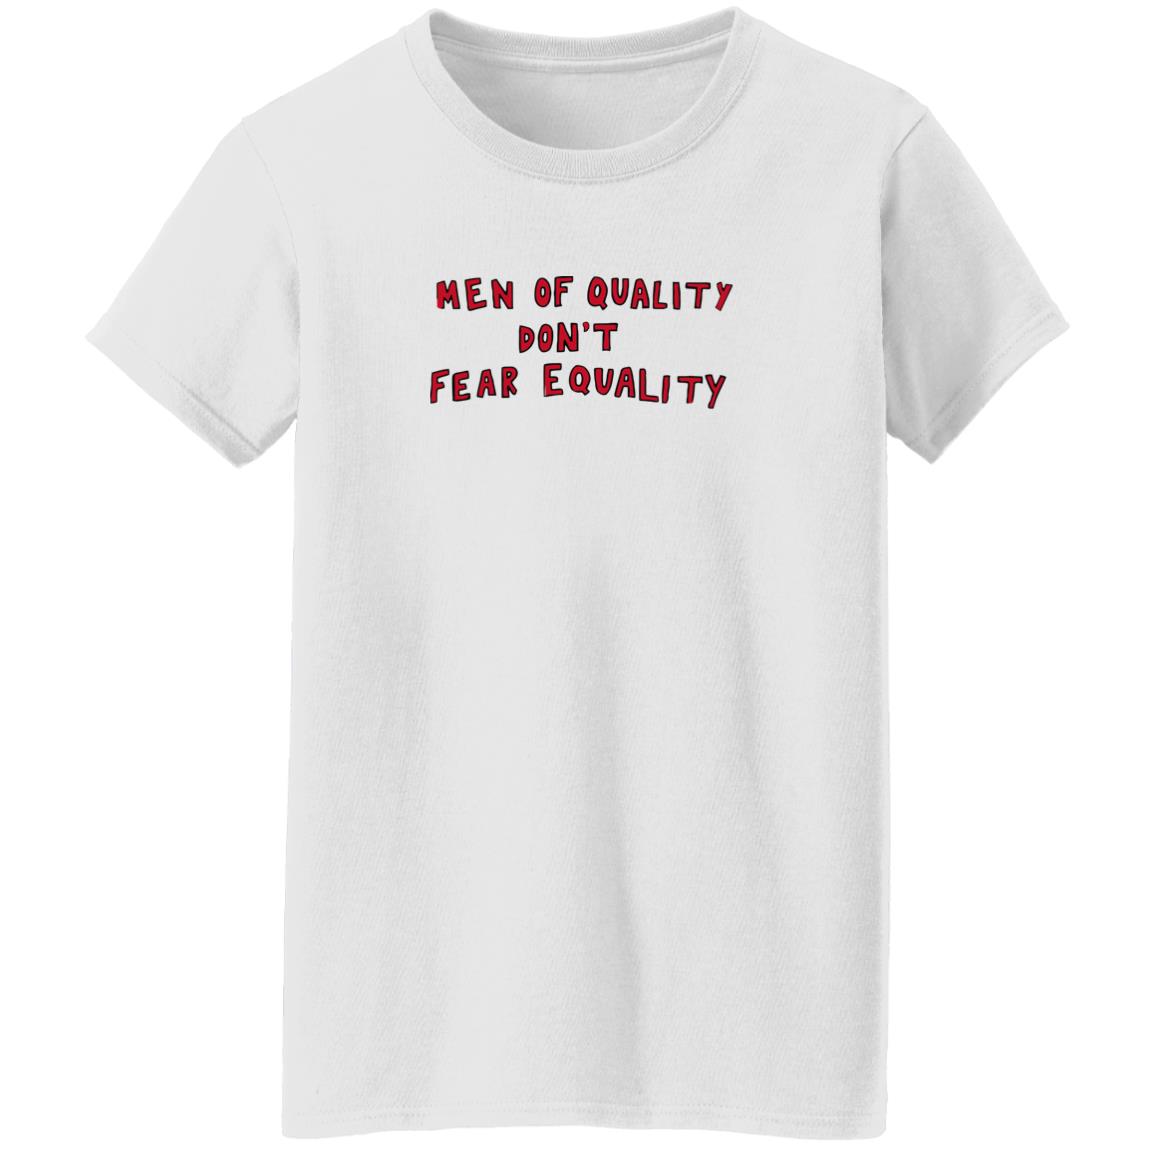 Chnge Merch Men Of Quality Don’t Fear Equality Shirt Giannis Antetokounmpo